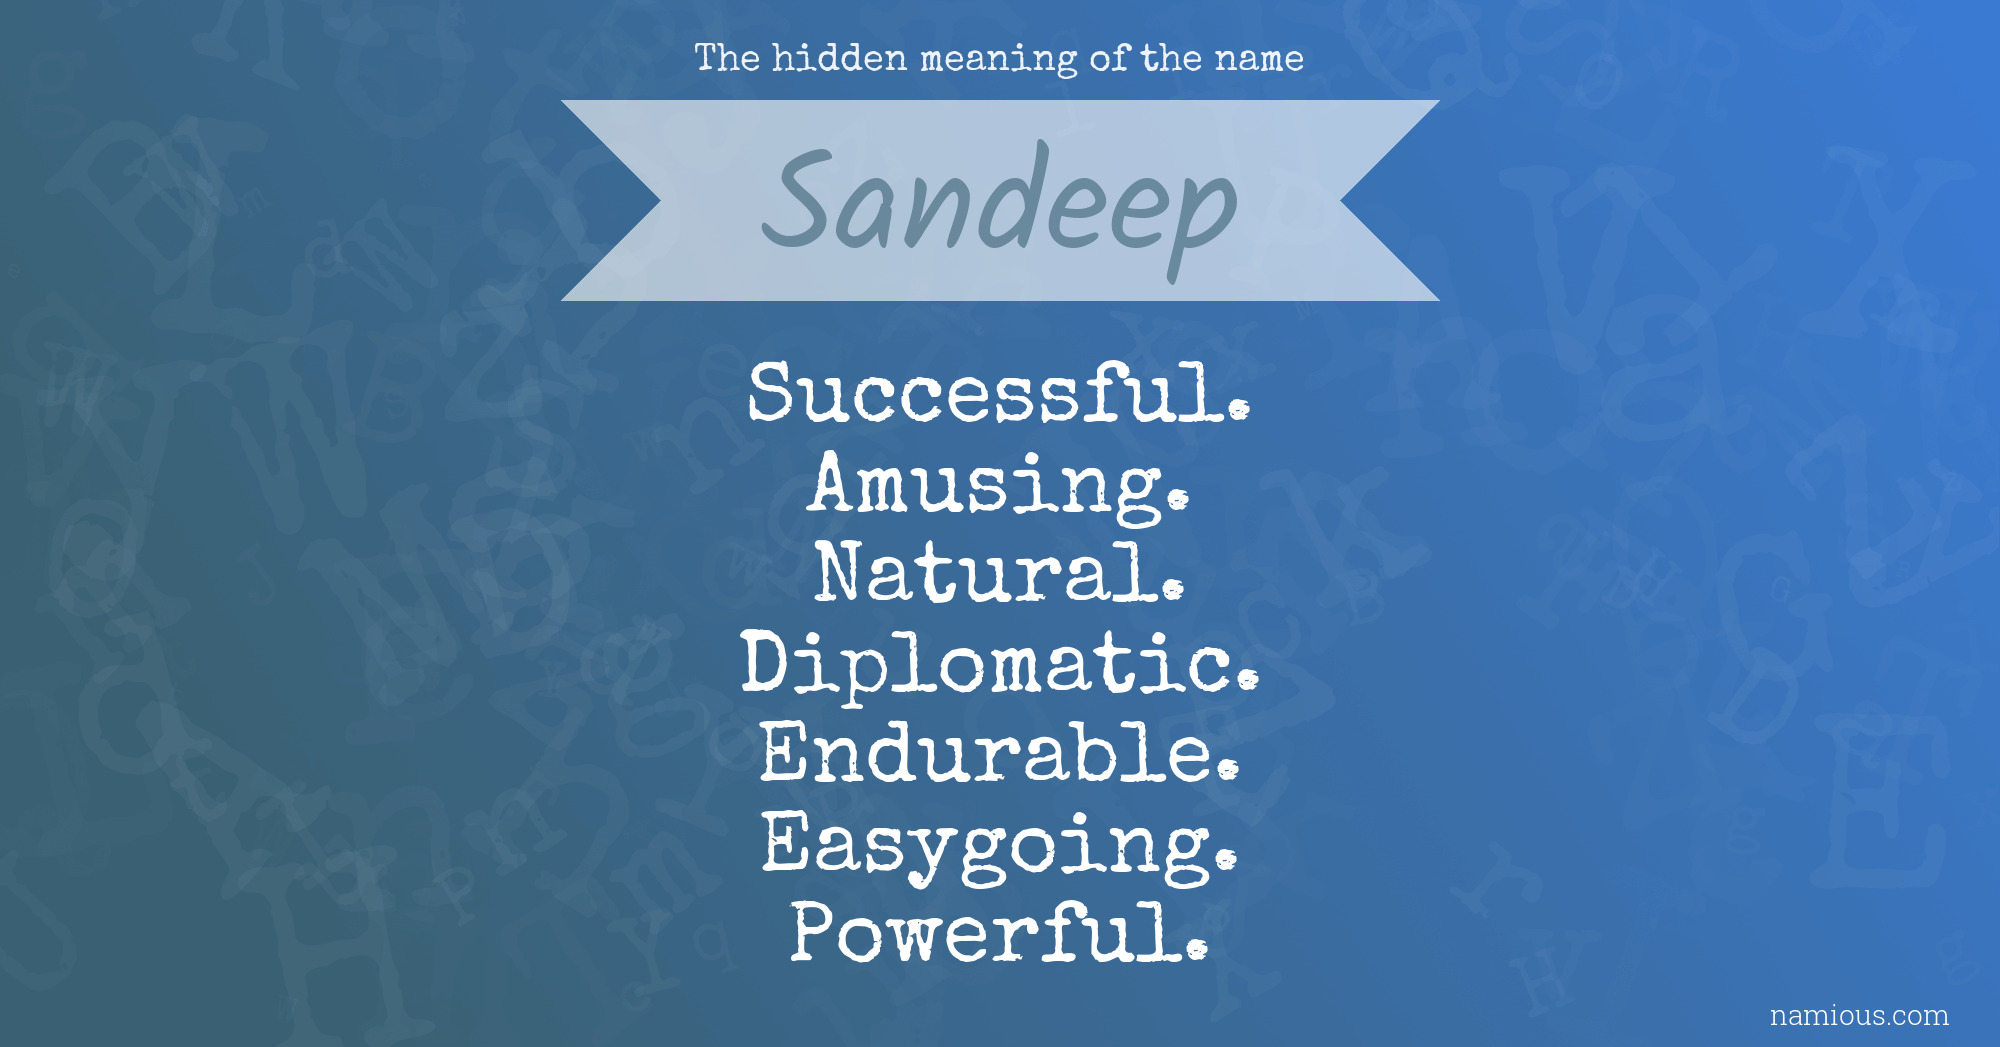 The hidden meaning of the name Sandeep